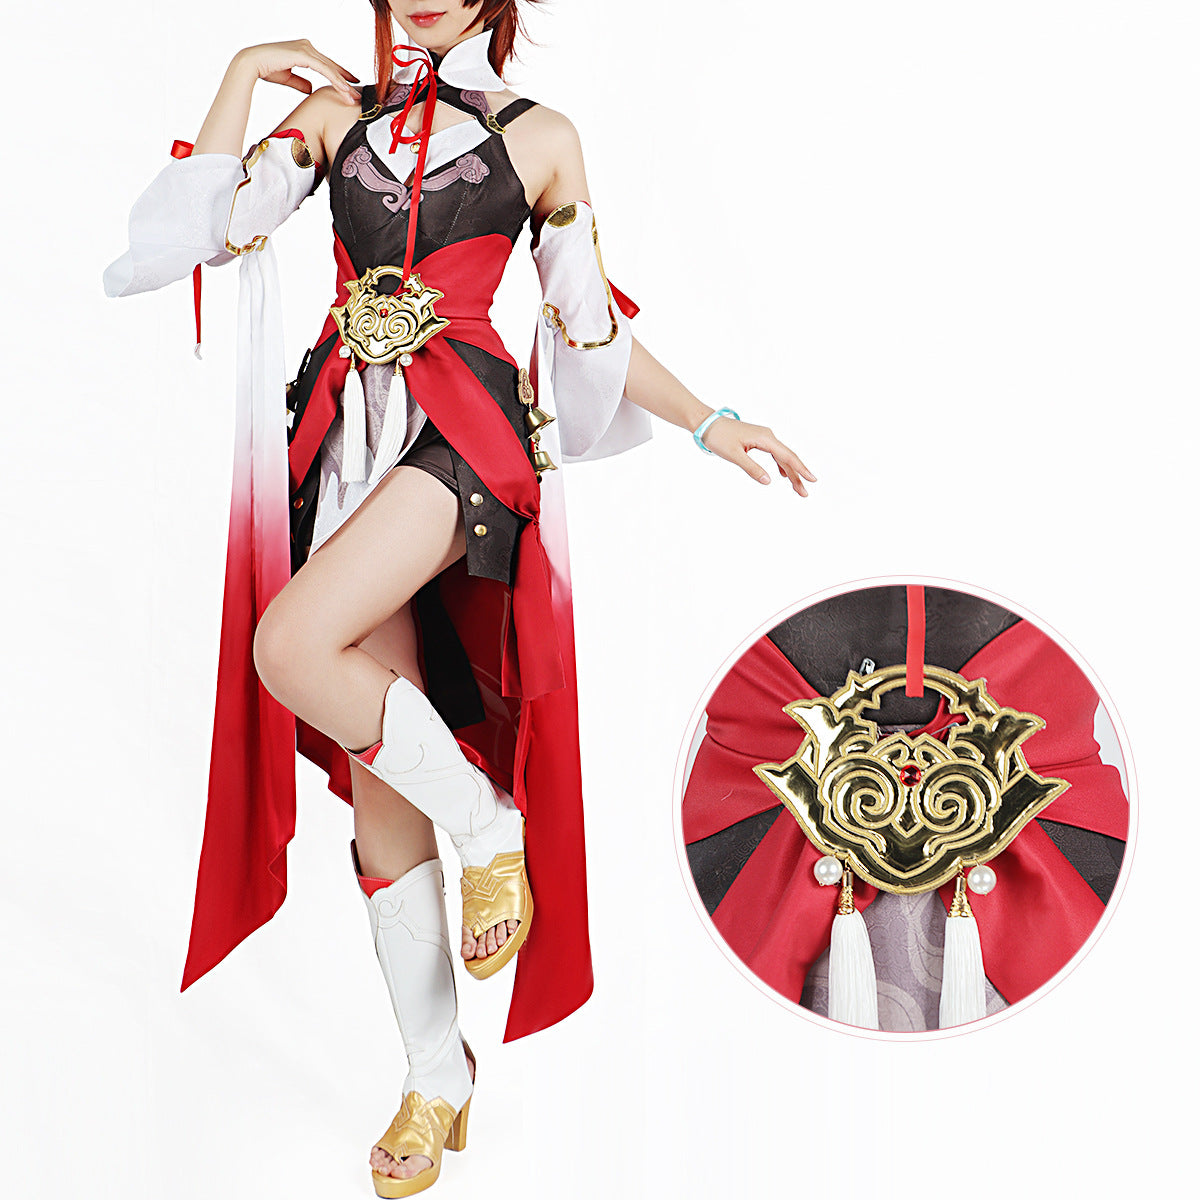 Rulercosplay Honkai Star Rail Ting Yun Cosplay Costume With Accessories